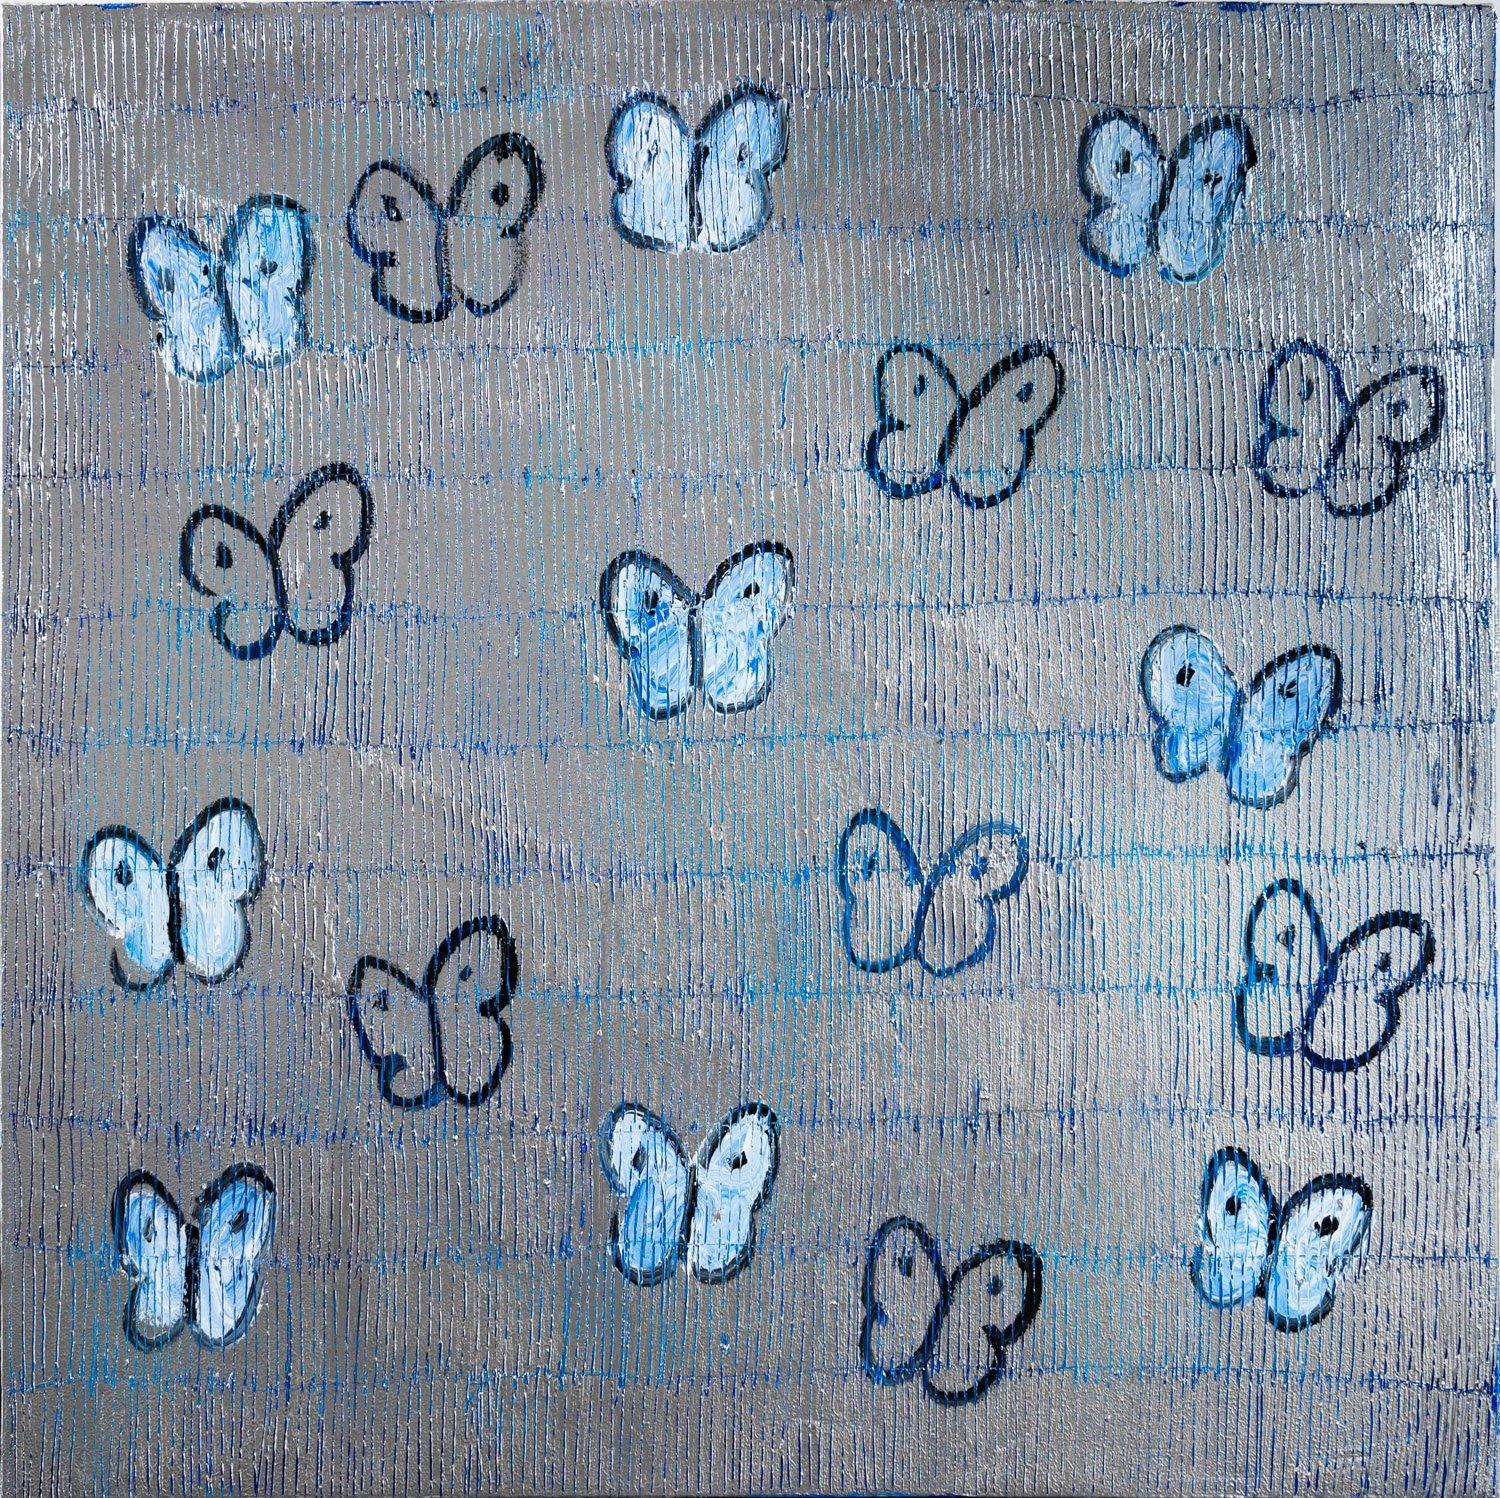 Renowned artist Hunt Slonem's "Blue Silver Ascension" is a 40 x 40 metallic silver scored oil painting on wood board of contemporary abstract butterflies in white and blue. 

*Painting is framed - Please note that not all Hunt Slonem frames are in